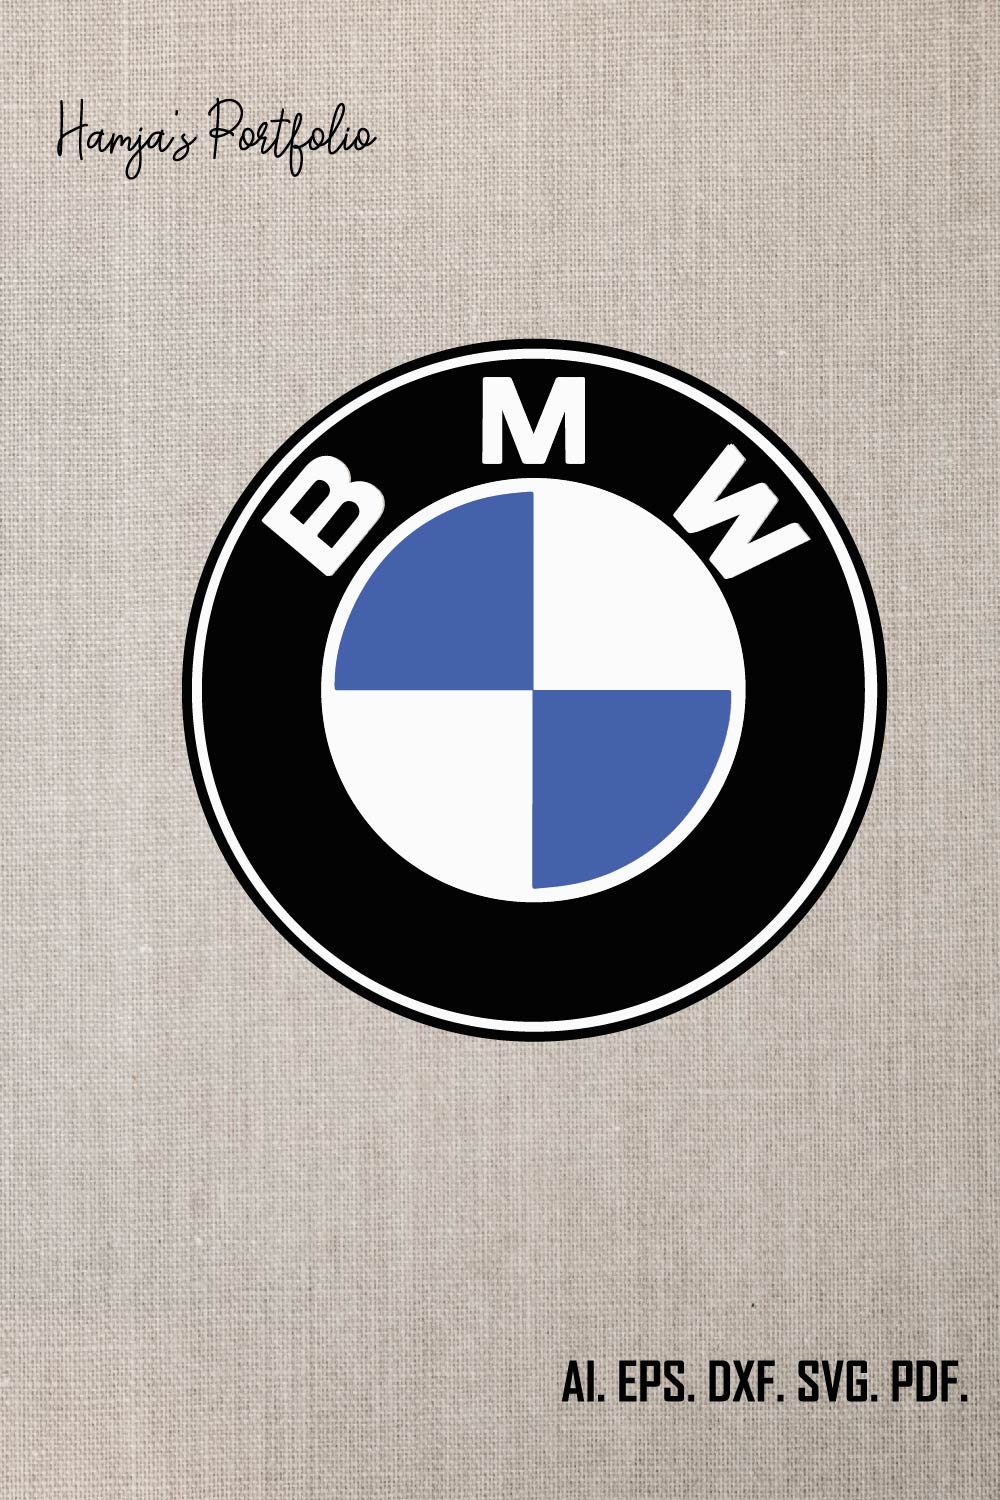 Car Manufacturers that start with B